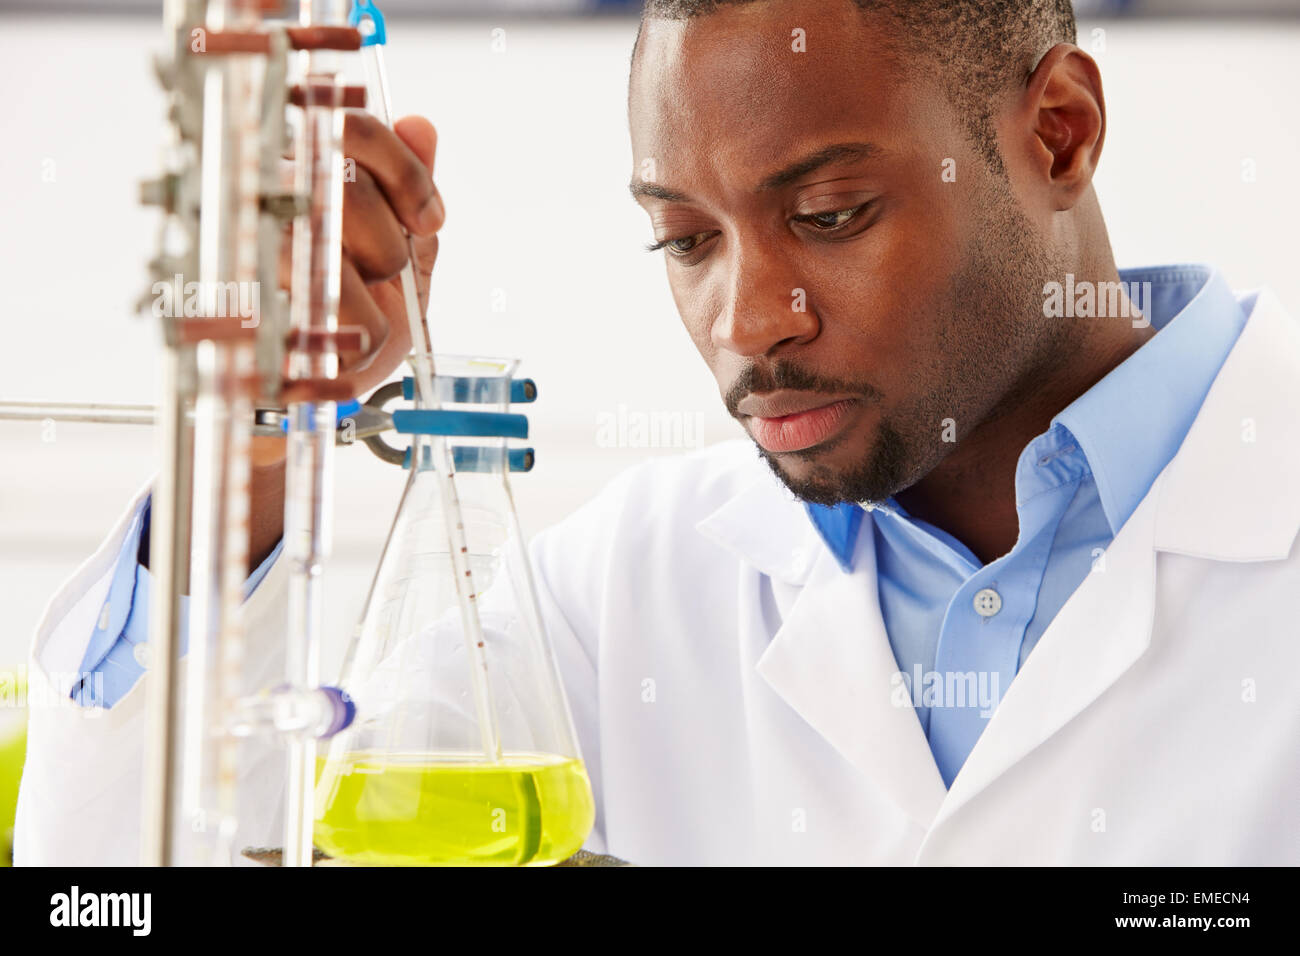 Scientist Studying Liquid In Flask Stock Photo